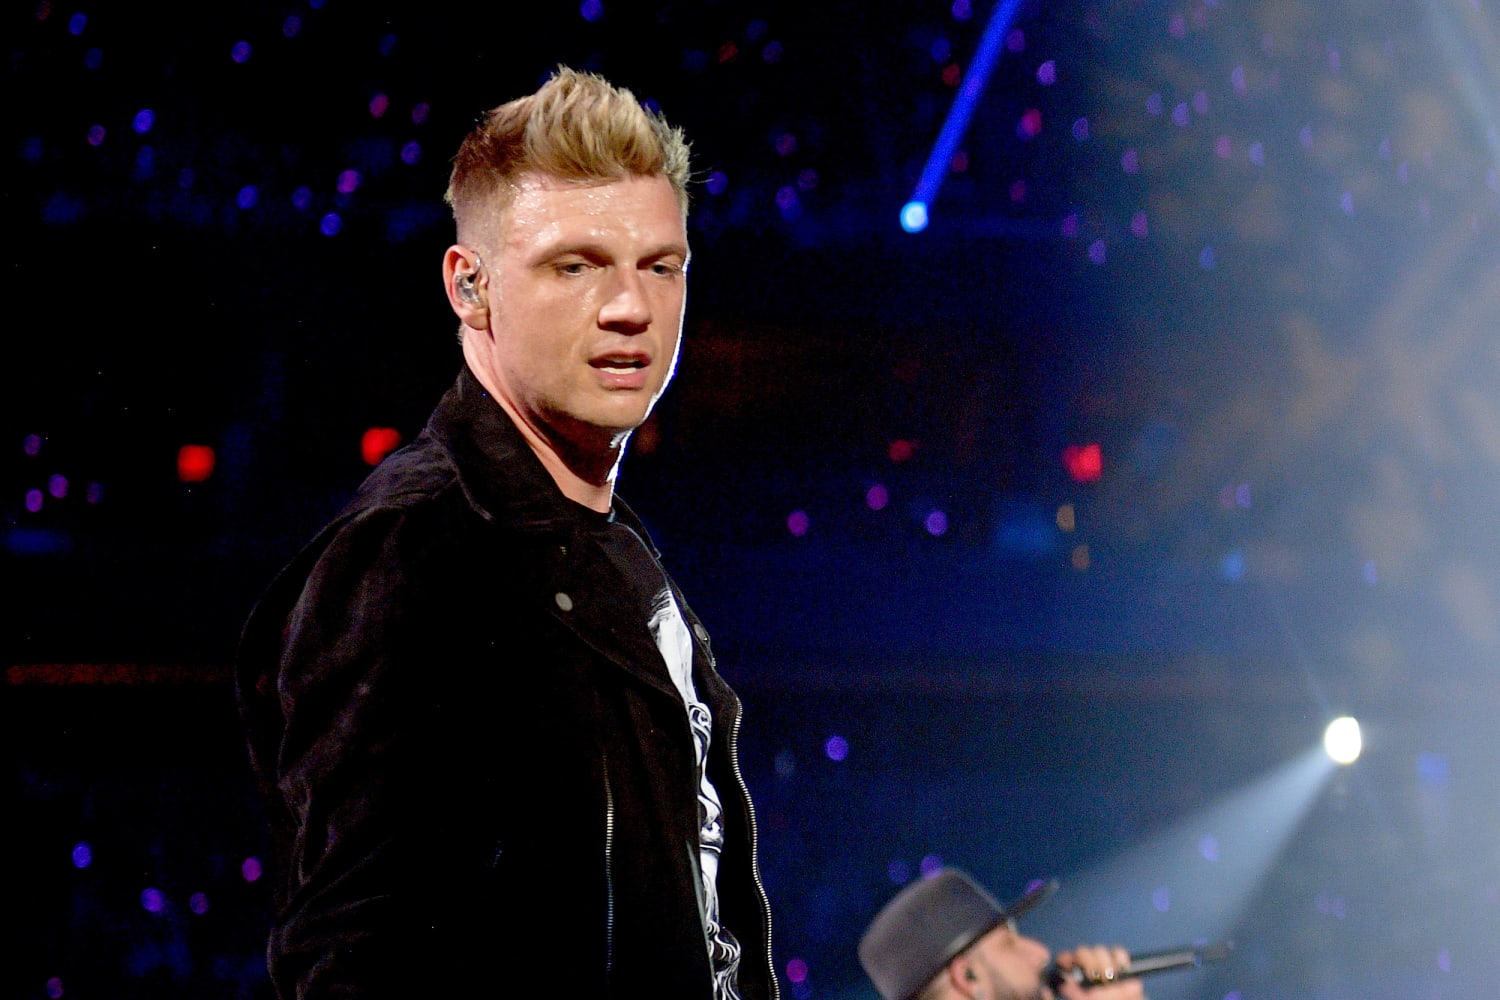 Backstreet Boys' Nick Carter accused of raping woman after 2001 concert